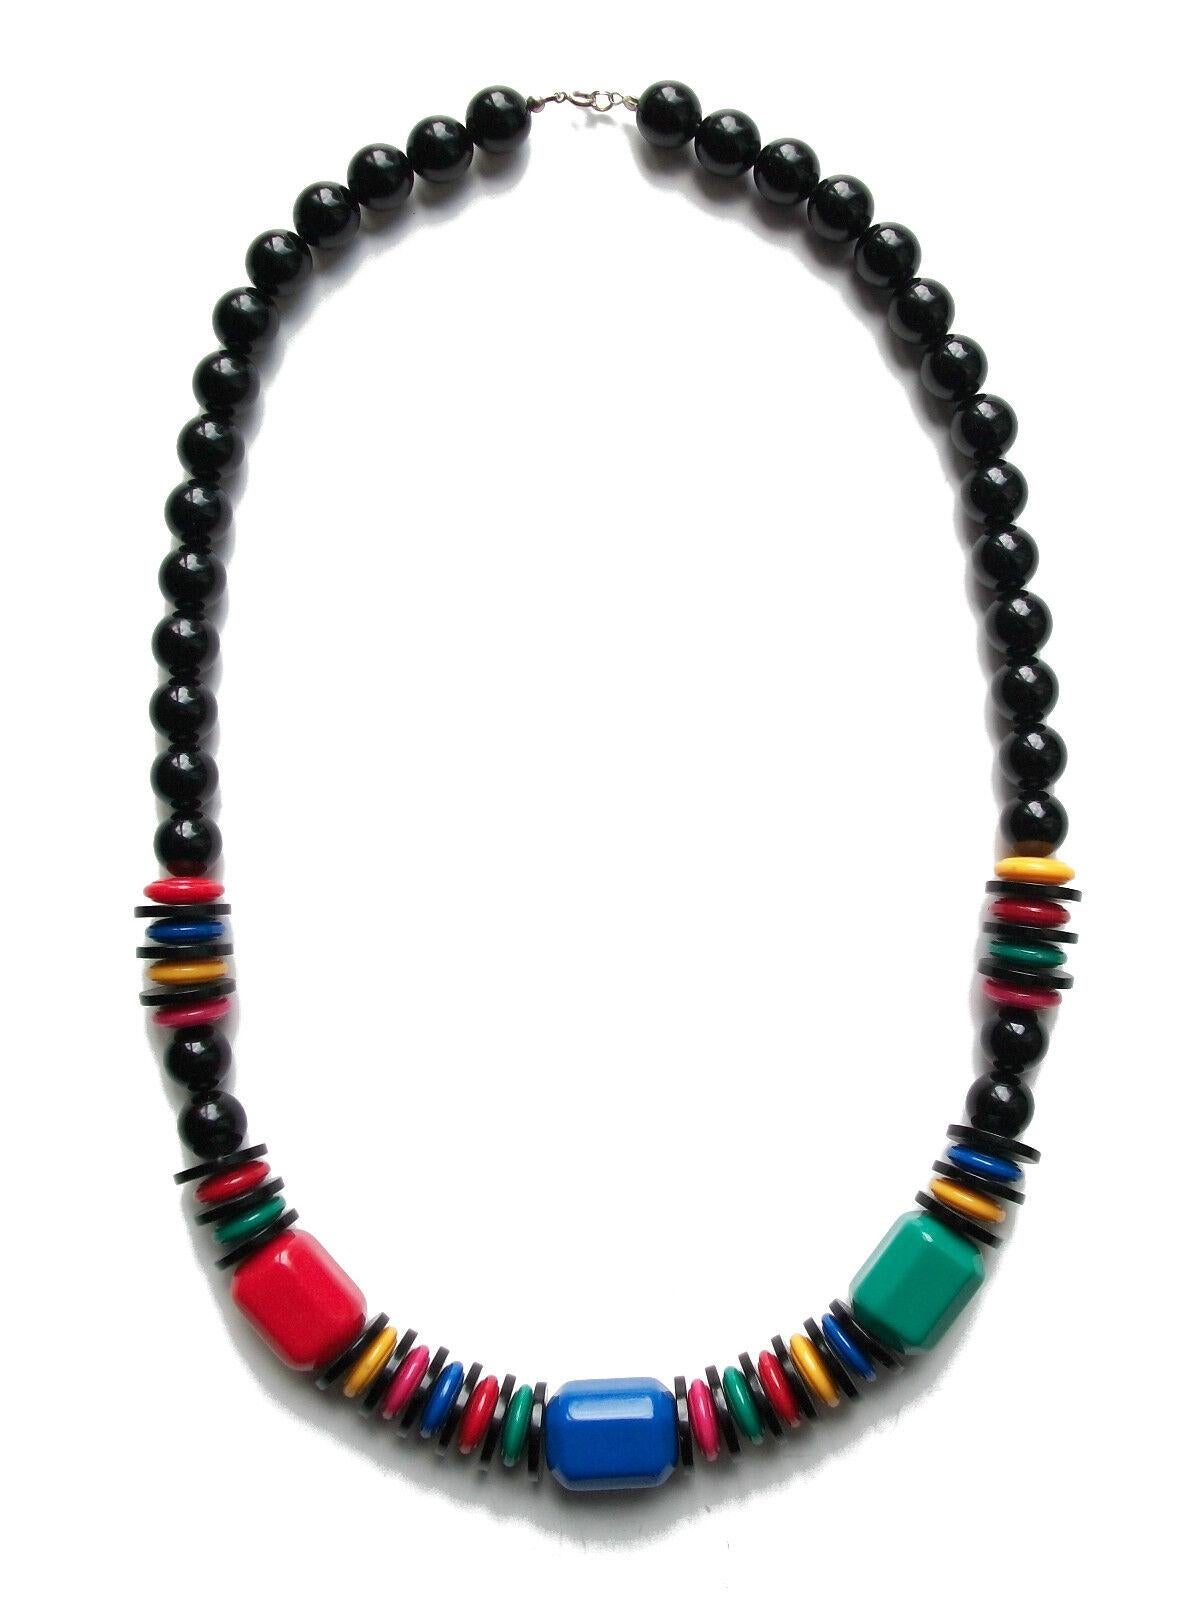 Vintage Multi-color & Black Acrylic Bead Necklace - Unsigned - Circa 1980's For Sale 3